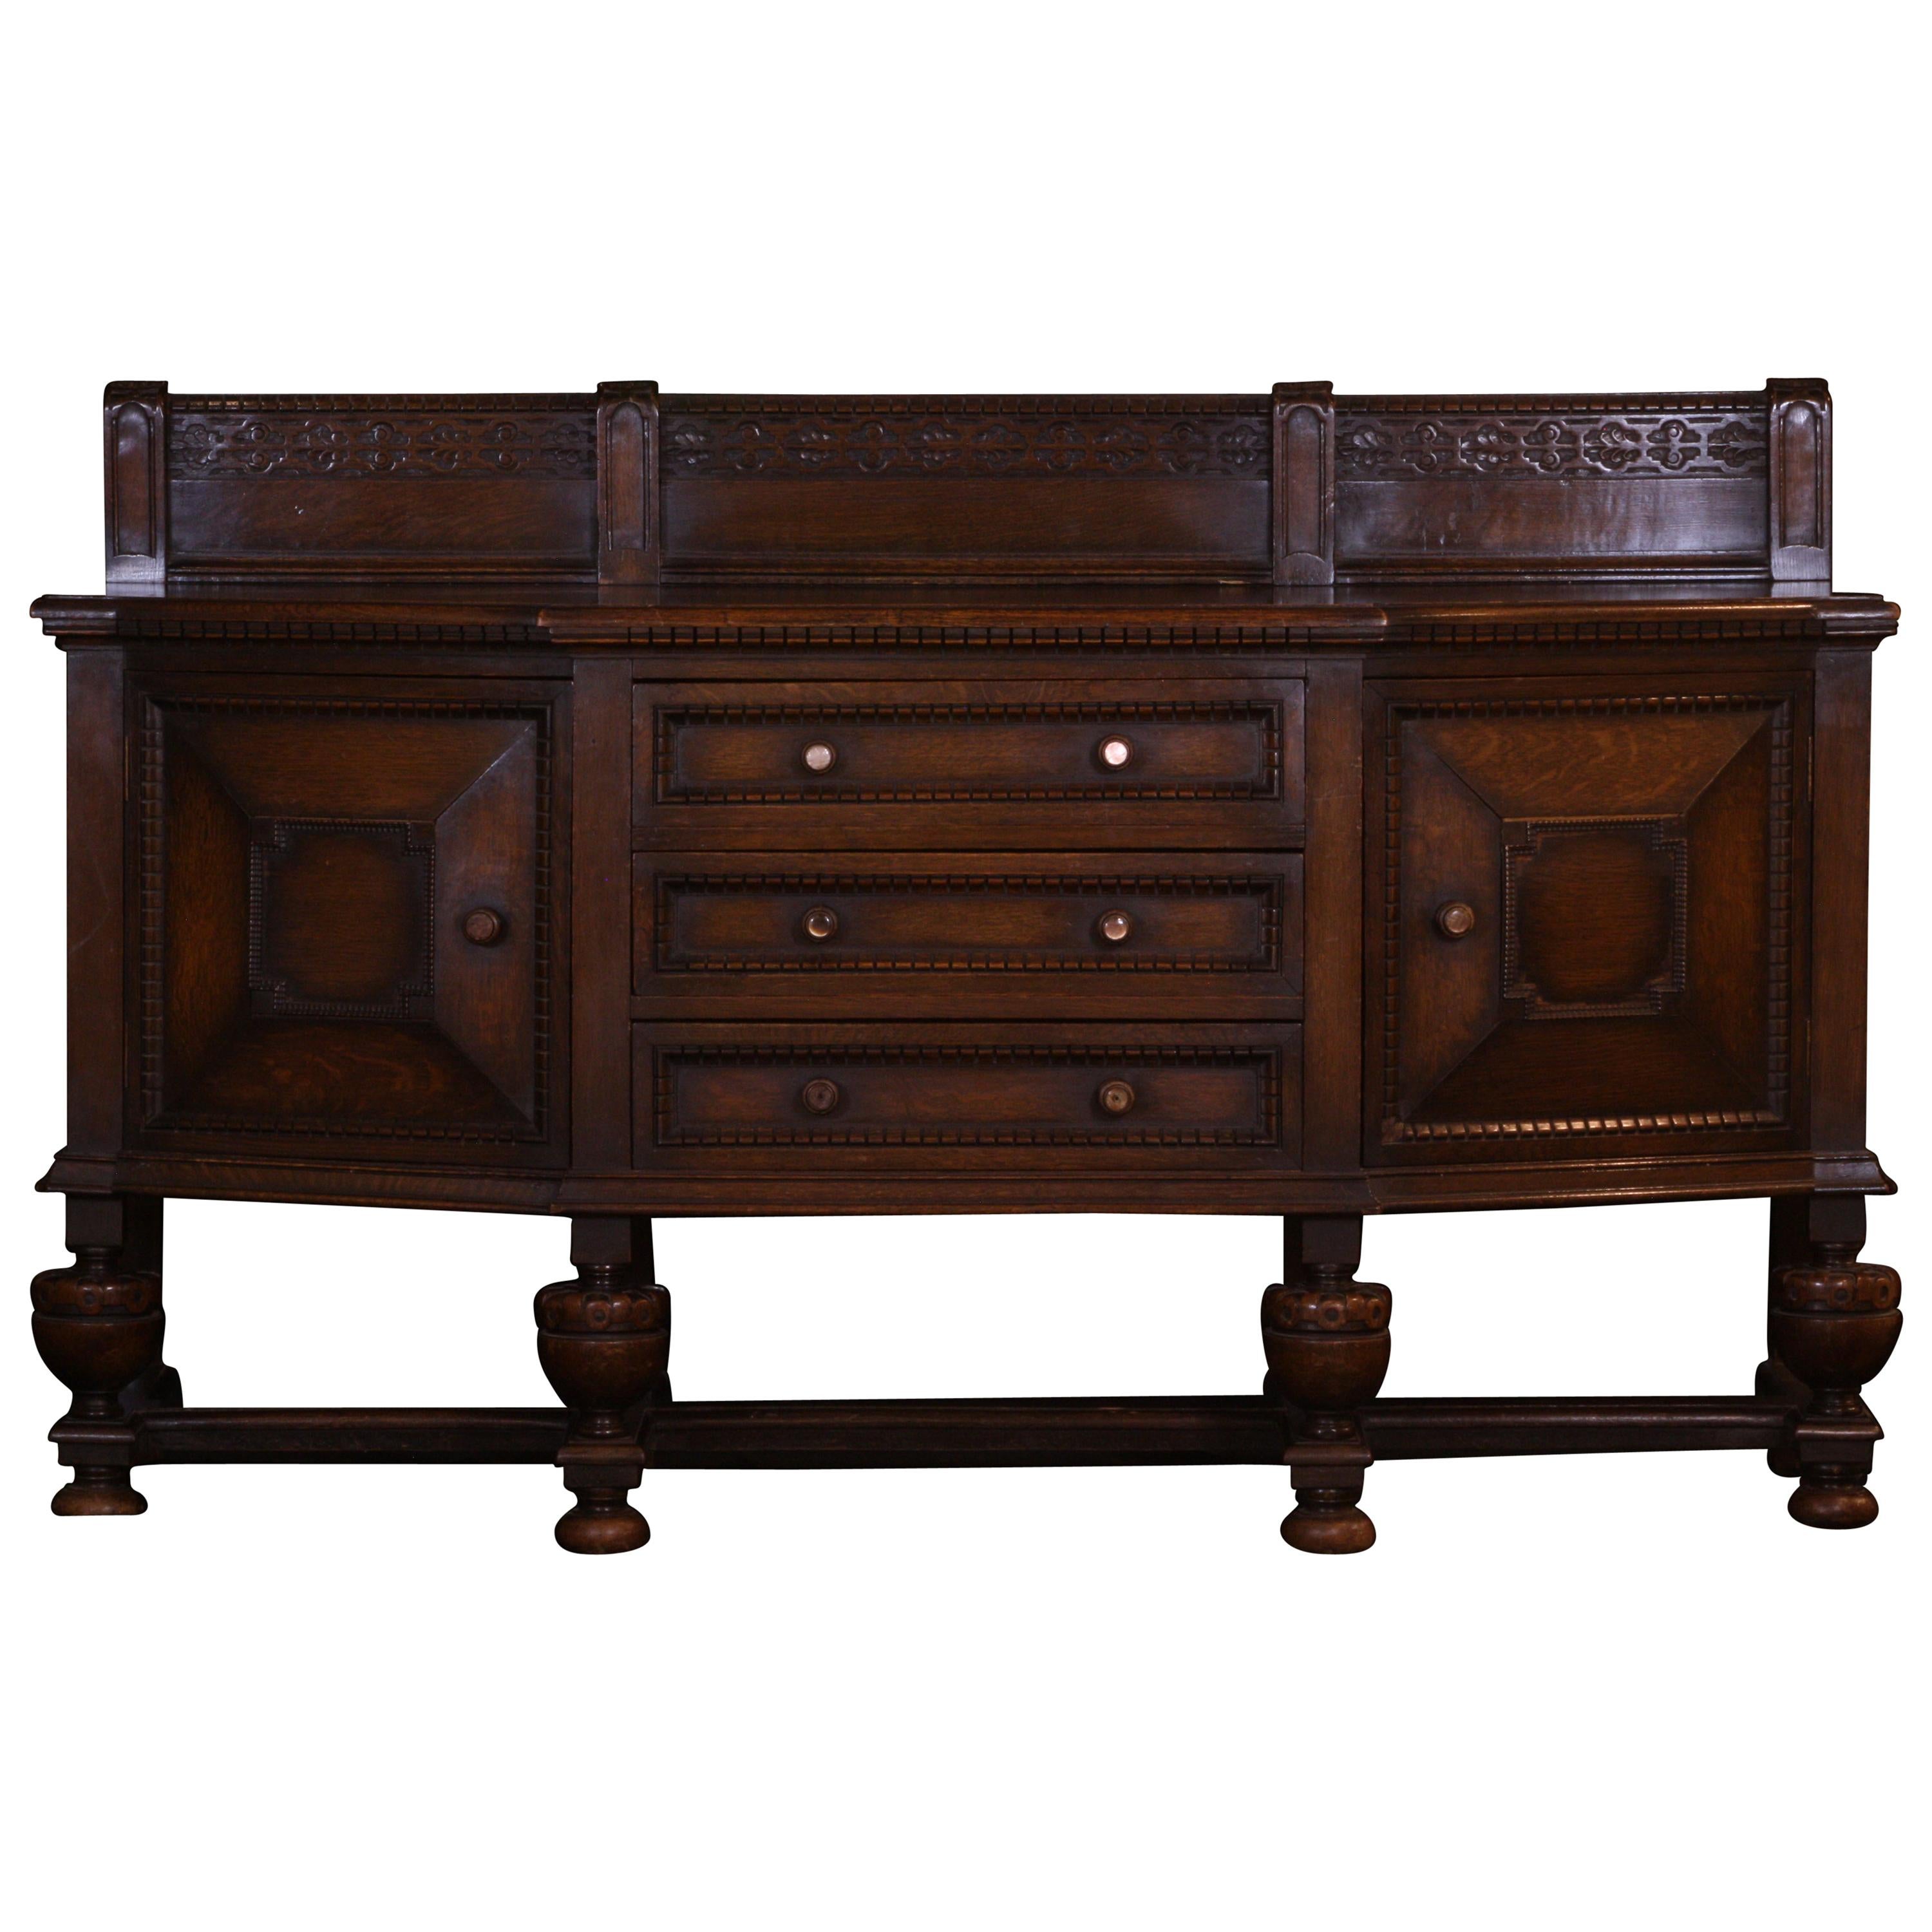 Oak Sideboard Late 19th Century English For Sale